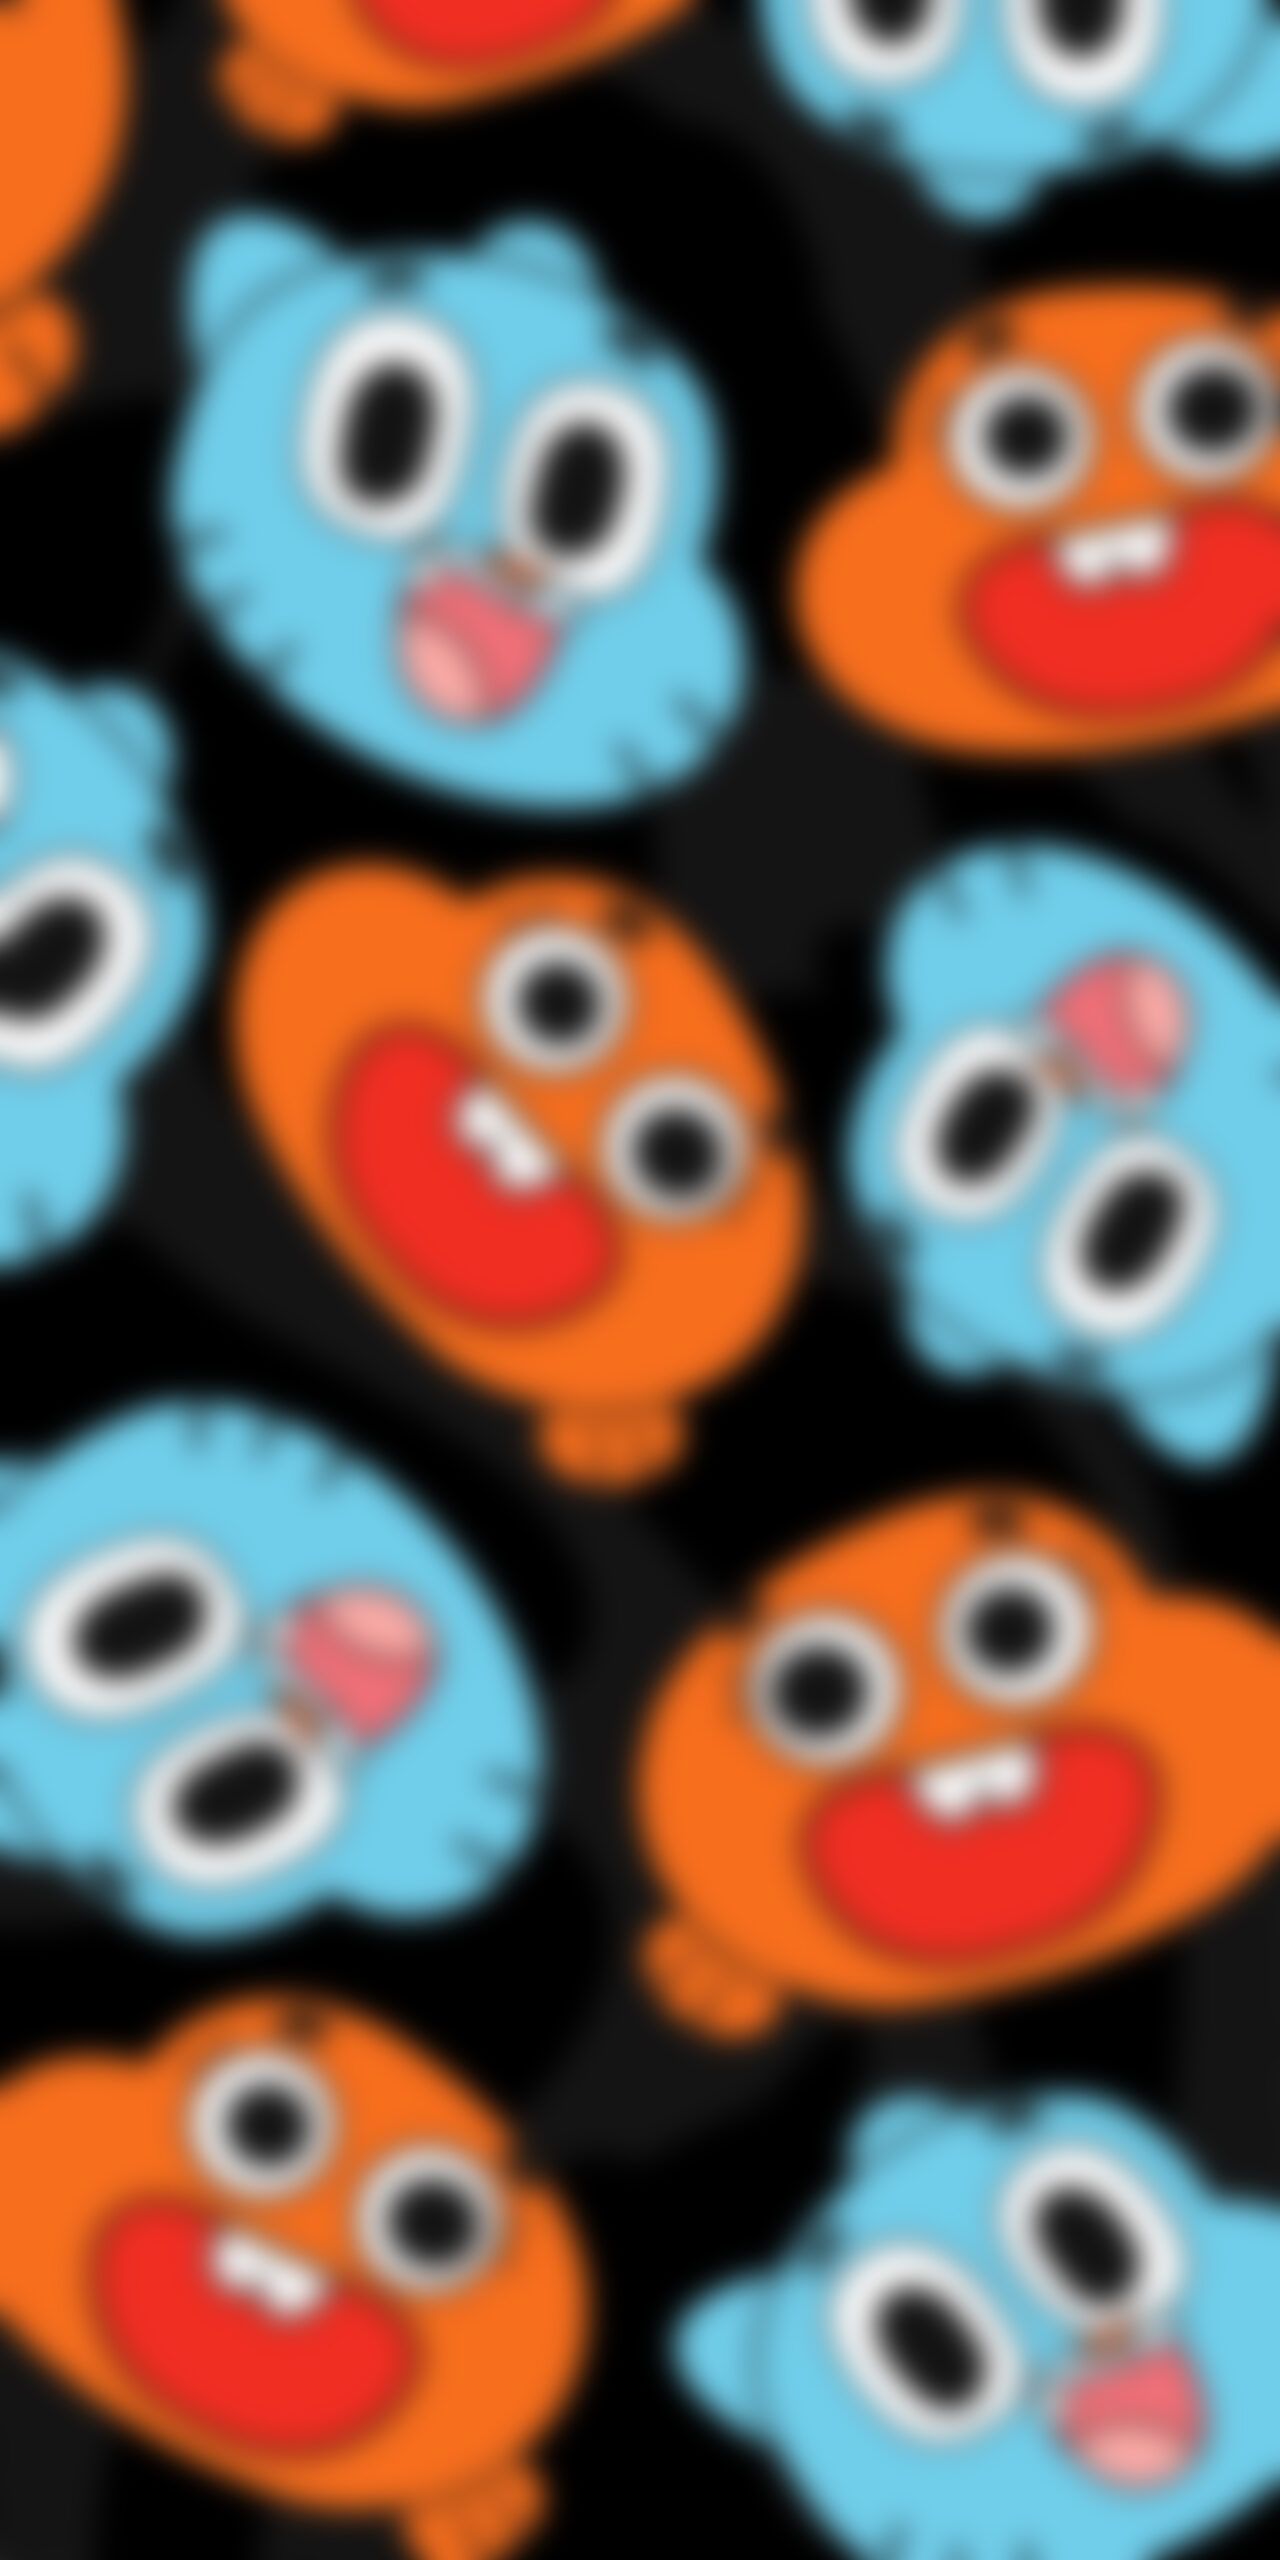 A close up of some orange and blue cartoon characters - Smile